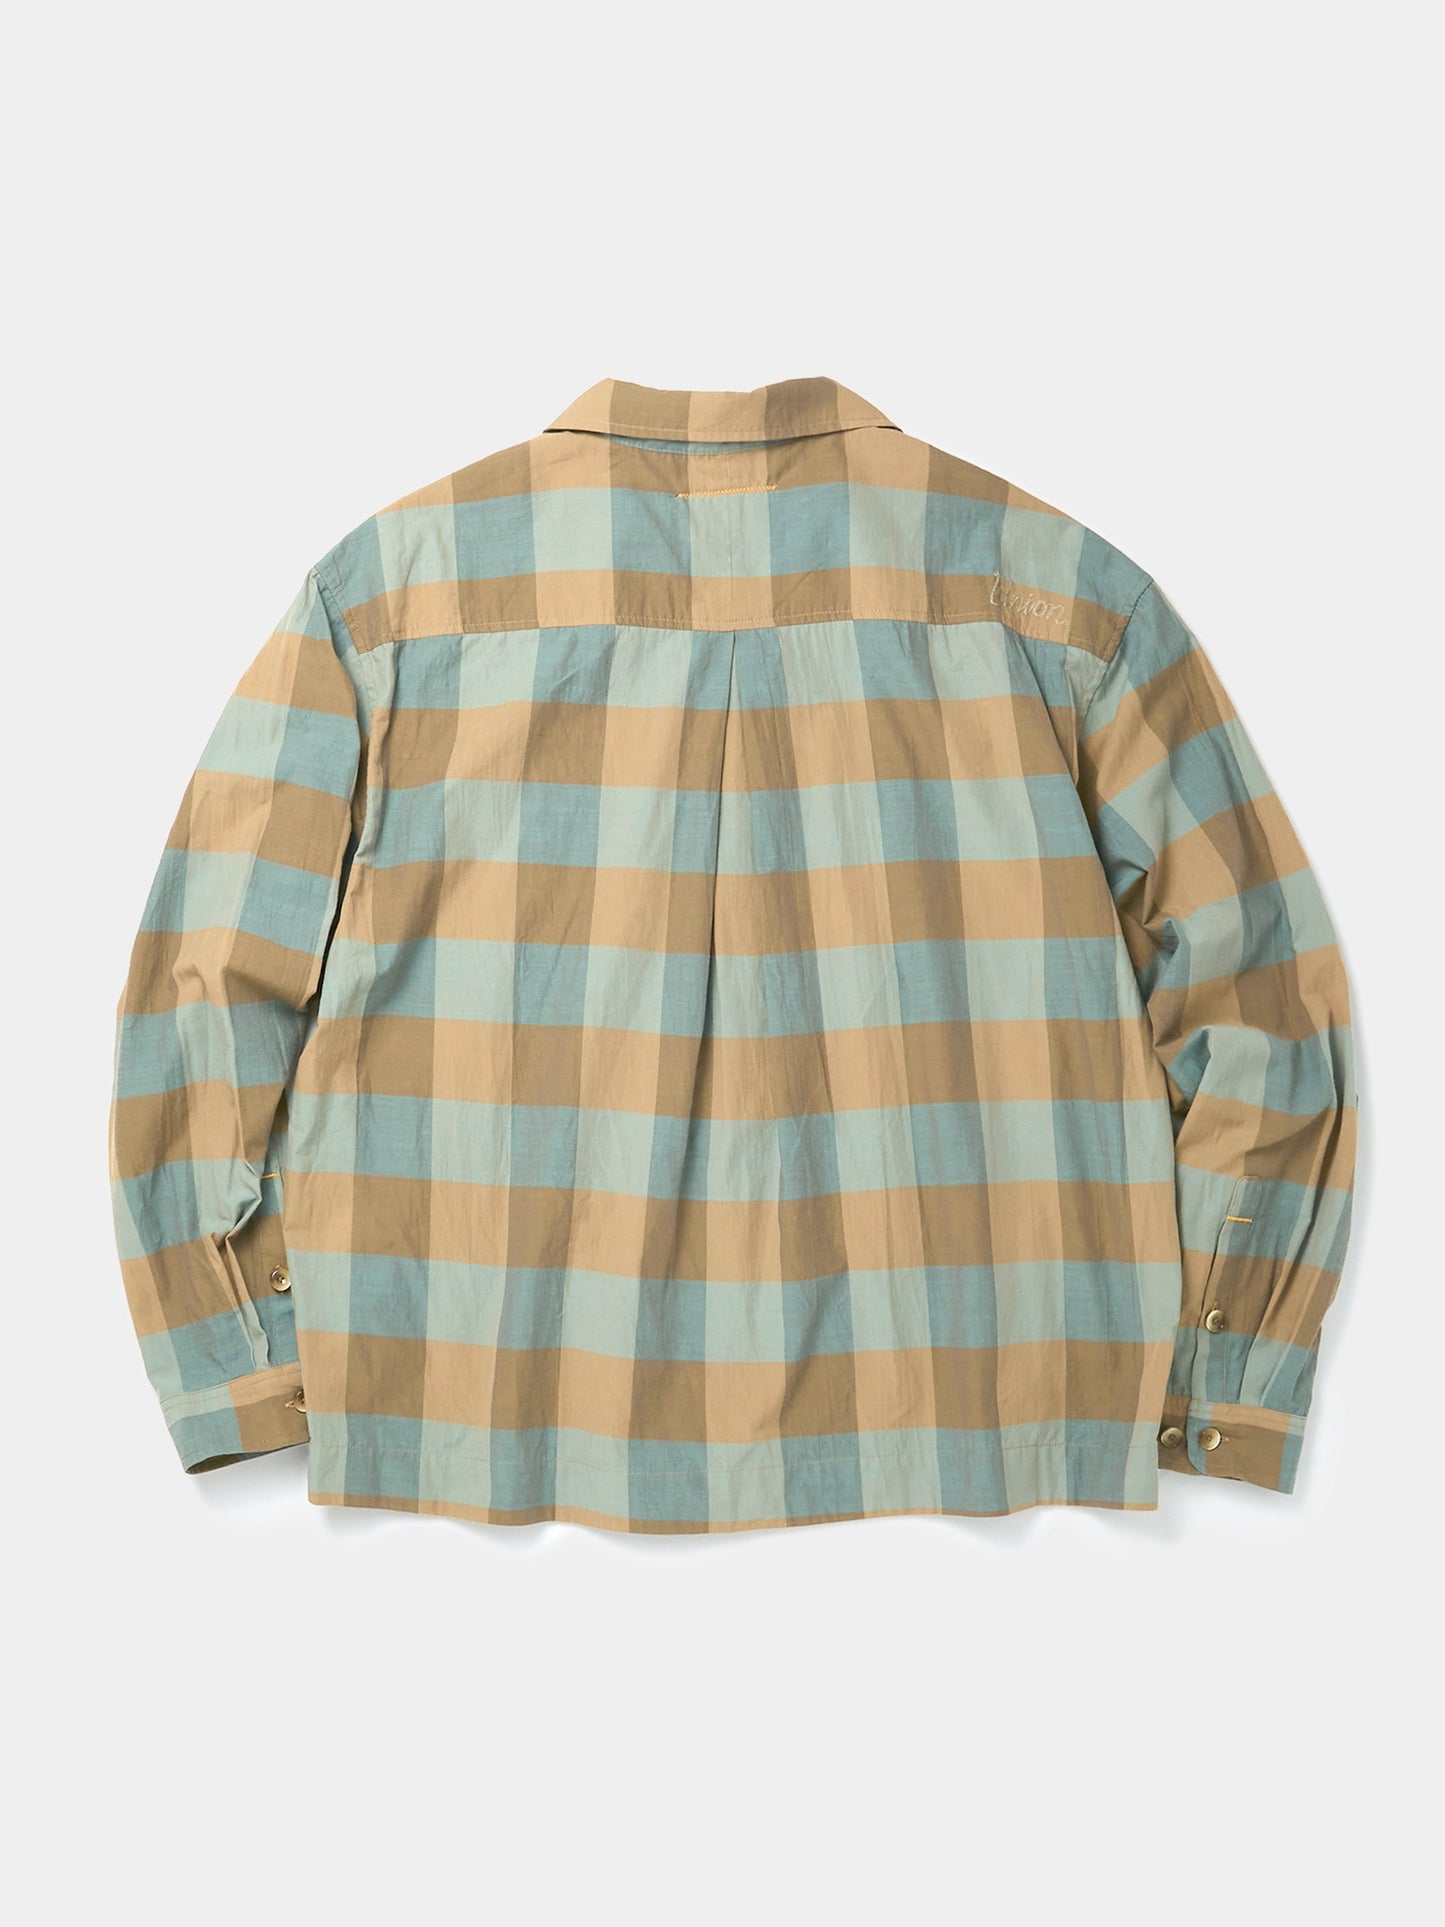 Crothers L/S Woven (Blue)